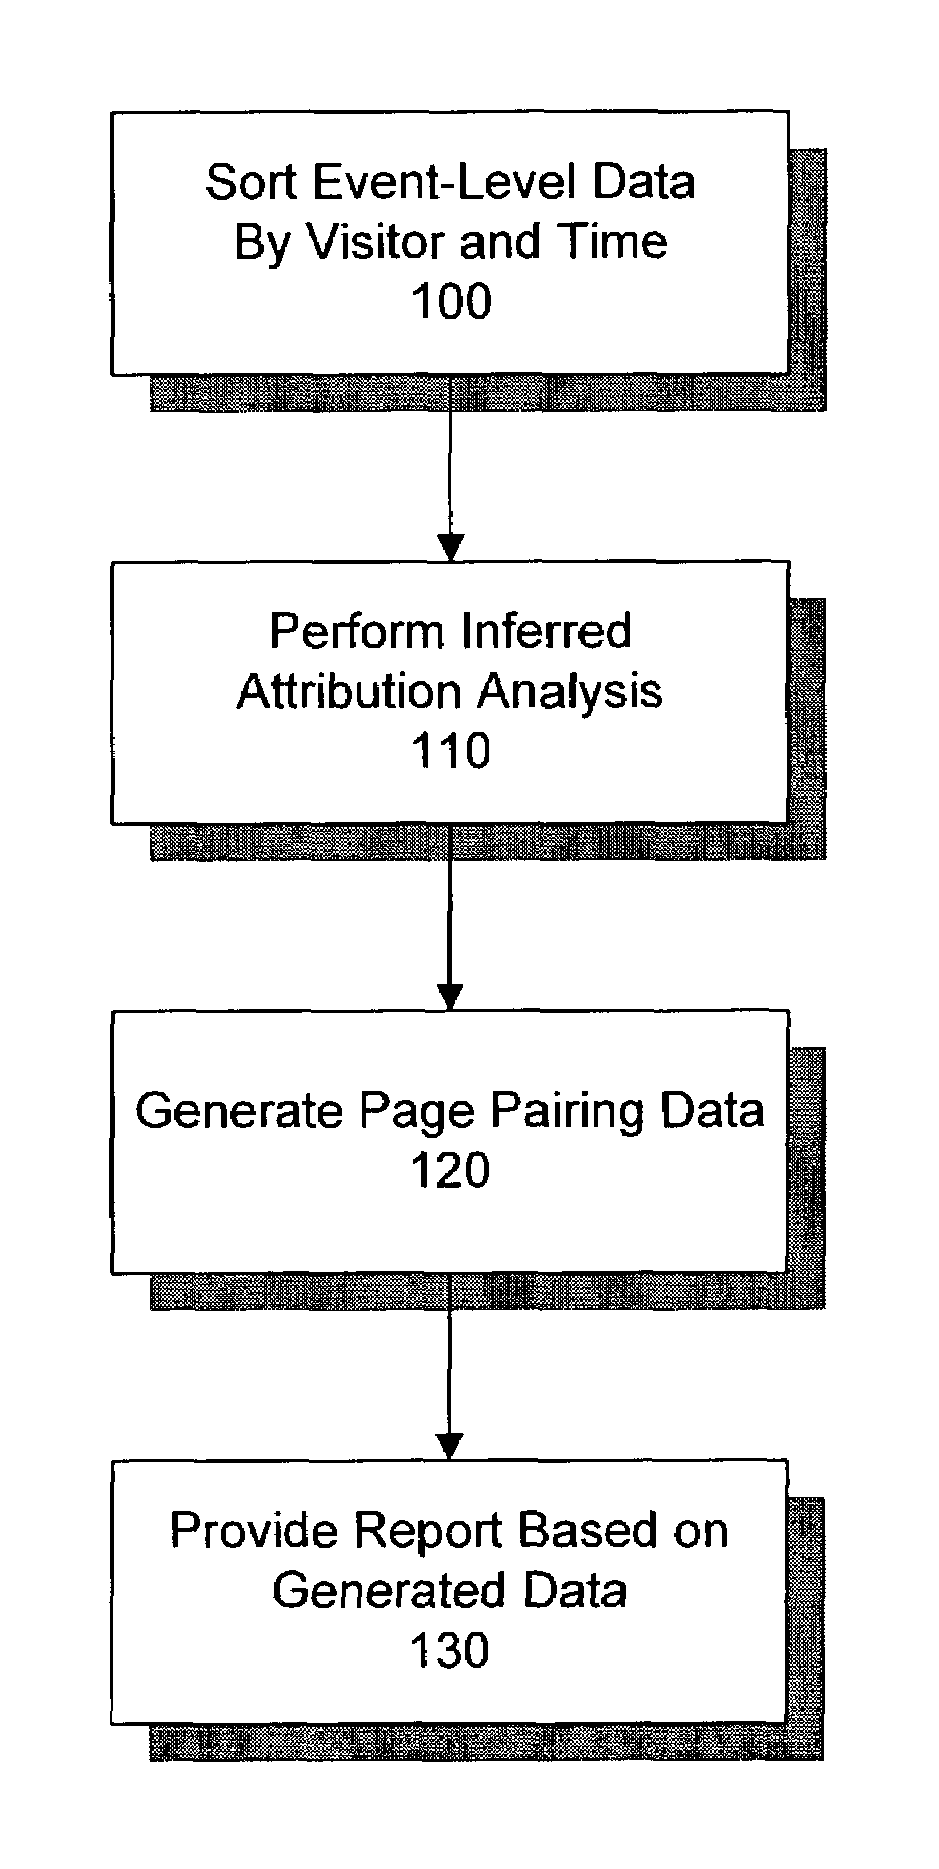 System and method for reporting website activity based on inferred attribution methodology